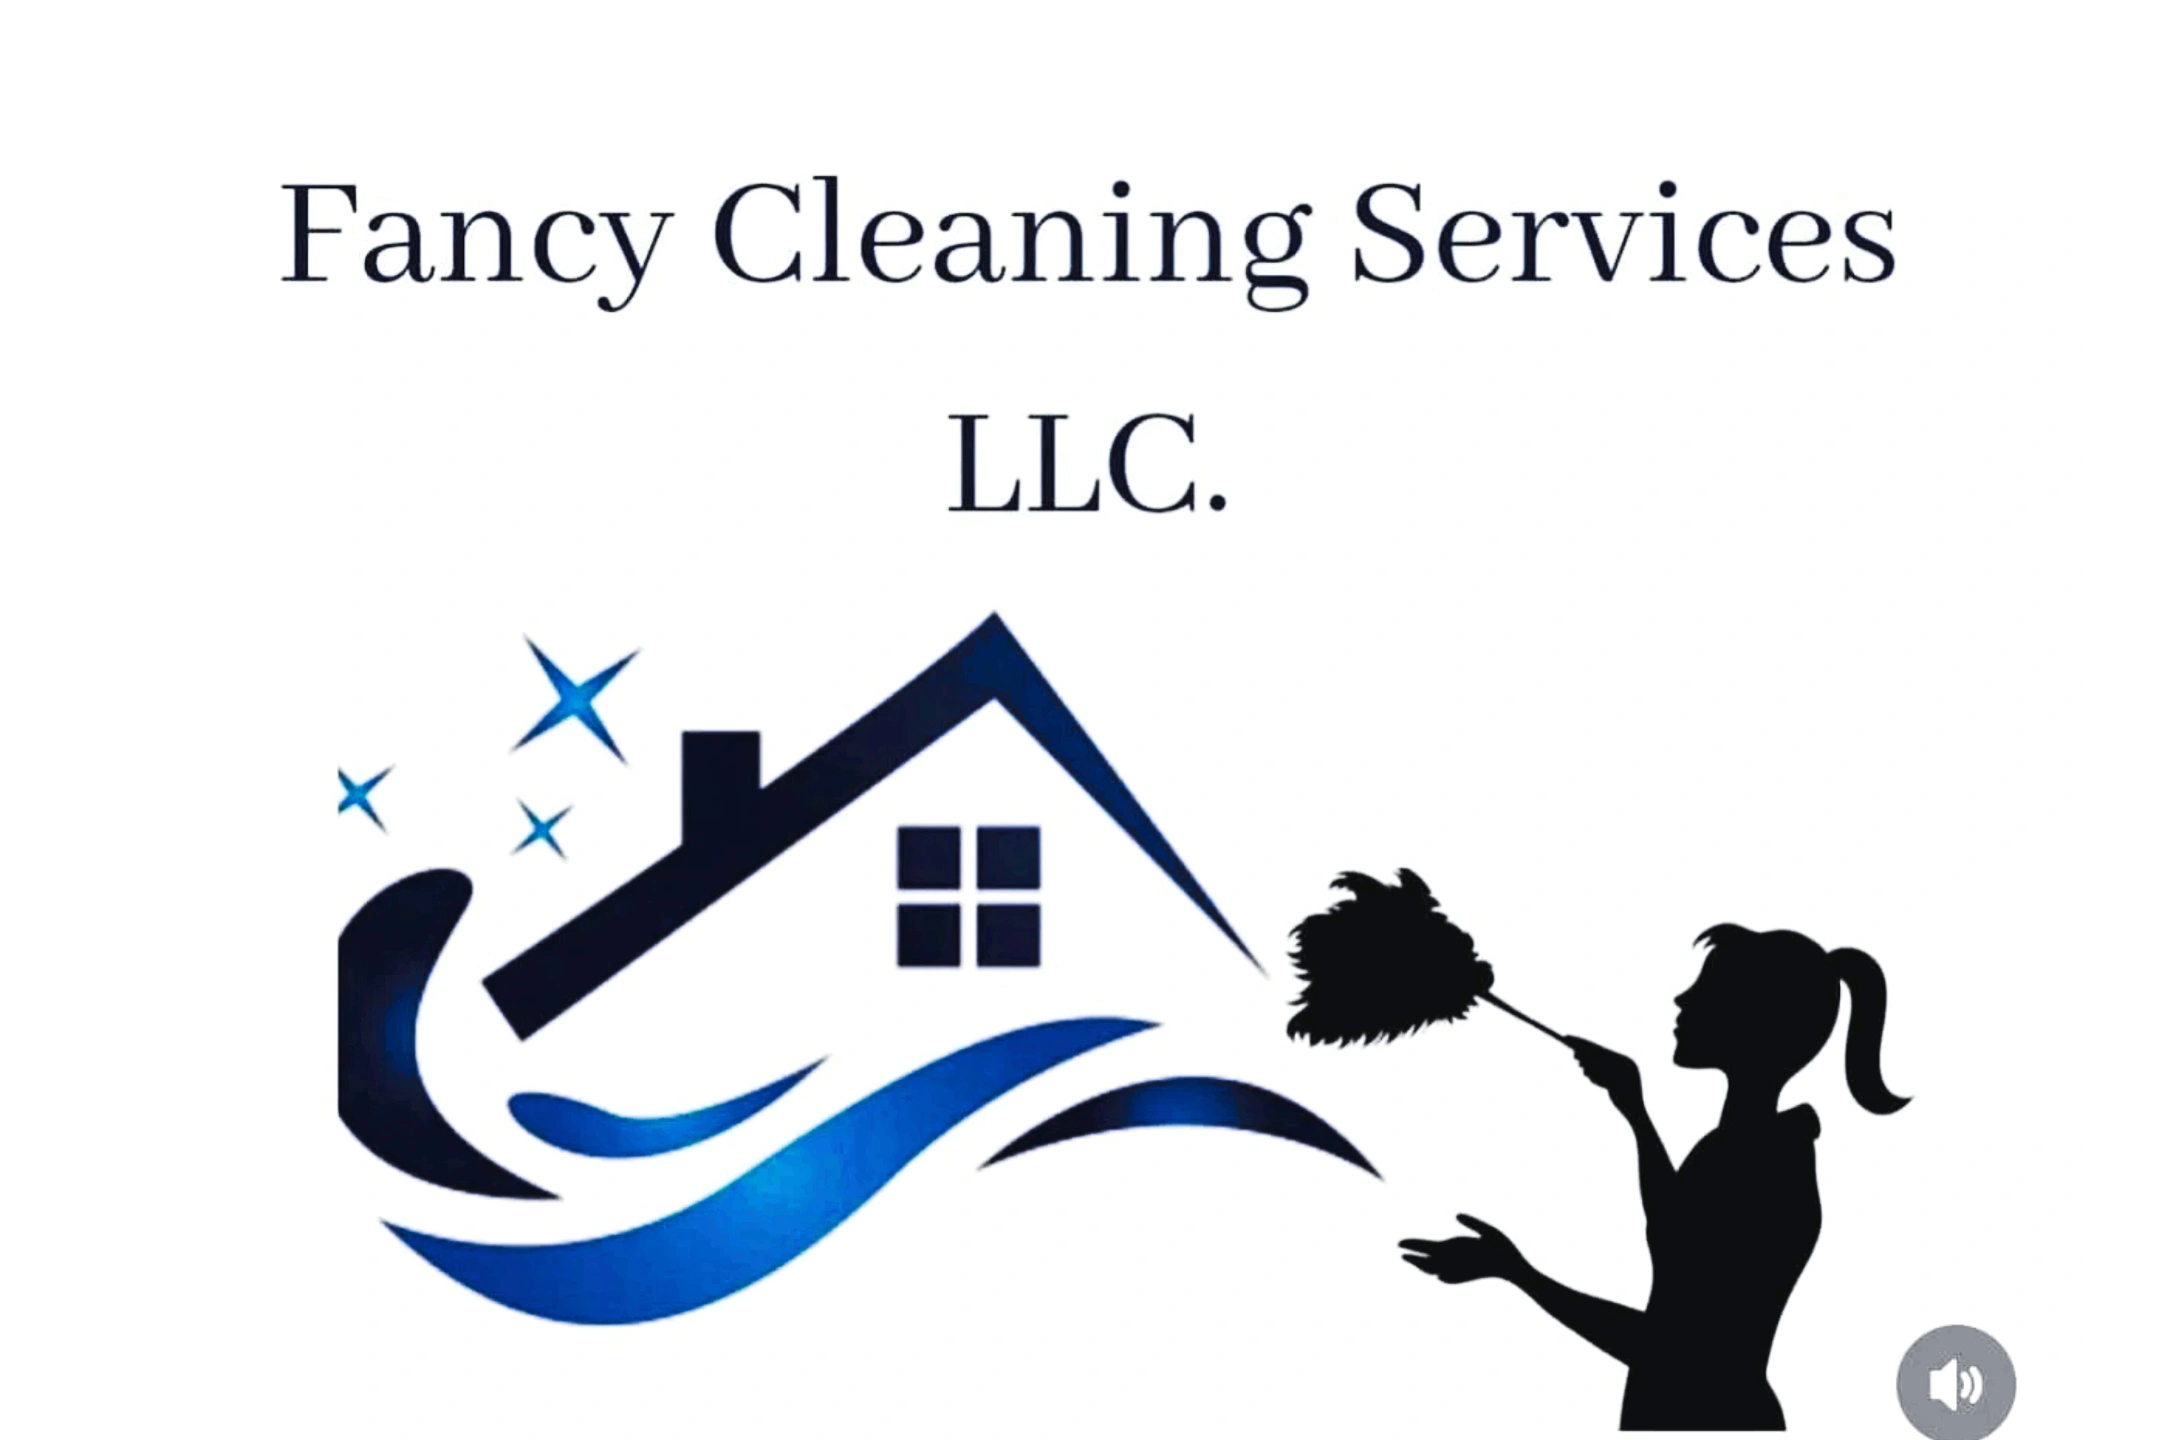 Fancy Cleaning Services LLC.